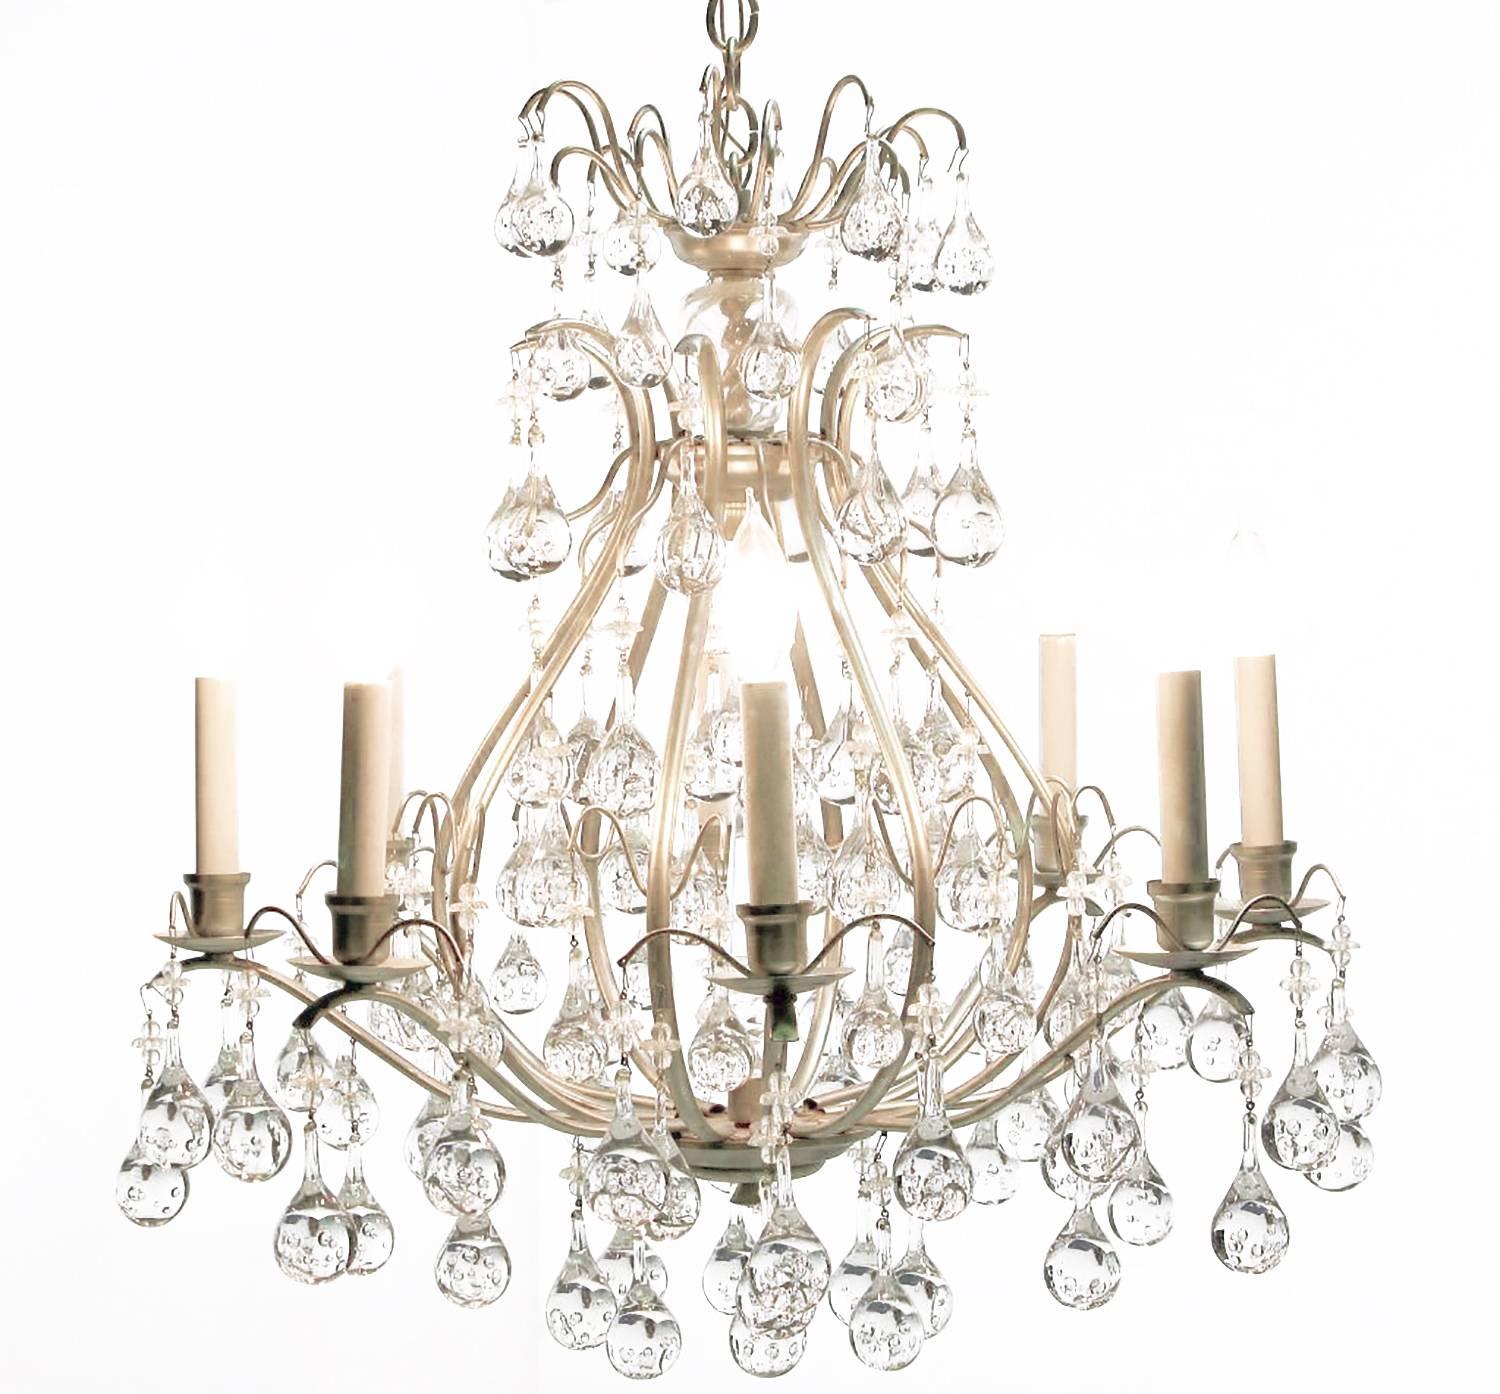 Striking eight-arm chandelier in brushed nickel, with a gourd form open center and rain drop bubble crystals adding a modern touch. Multiple tiers of crystals give the appearance of water gently dripping from the brushed nickel frame. Comes with